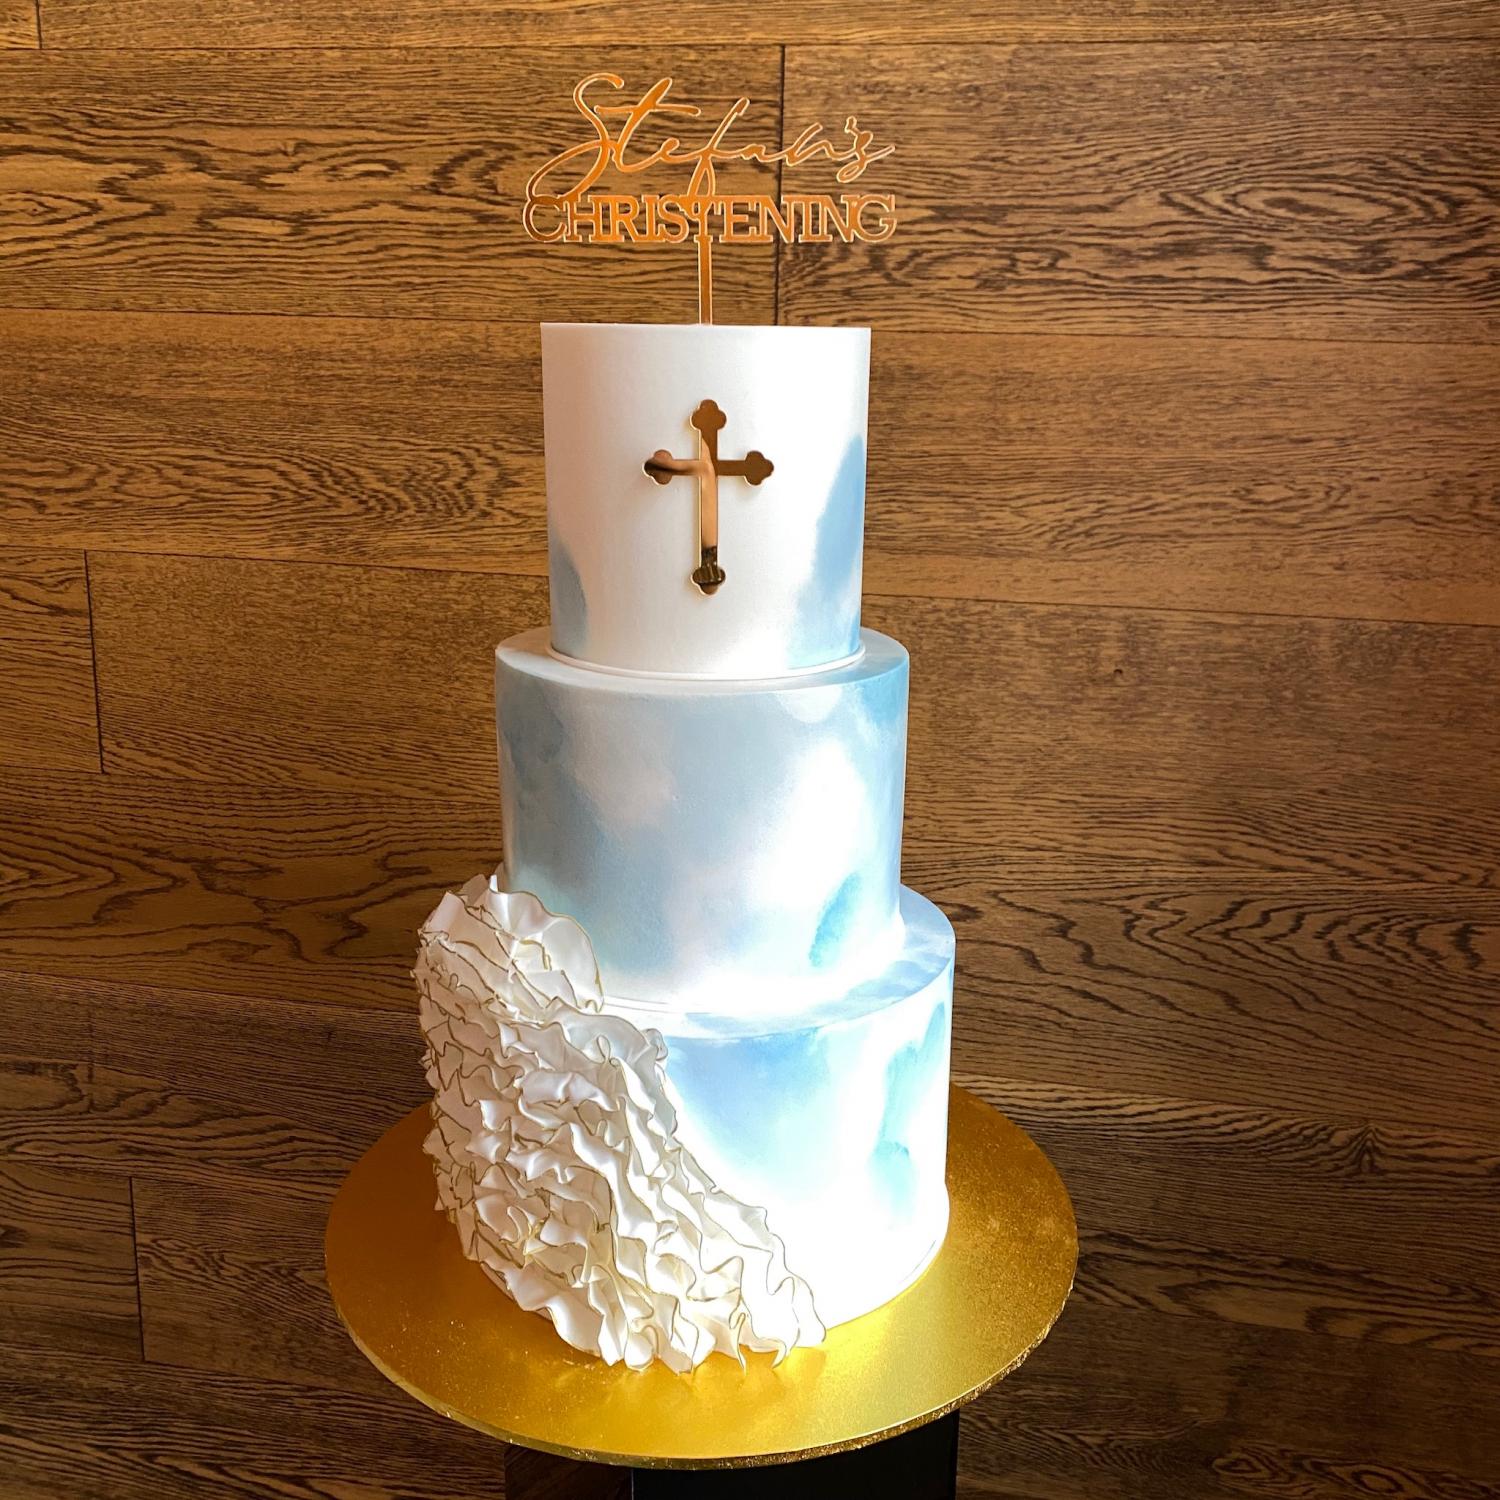 Baptism cake for a boy - Nichole's Fine Pastry